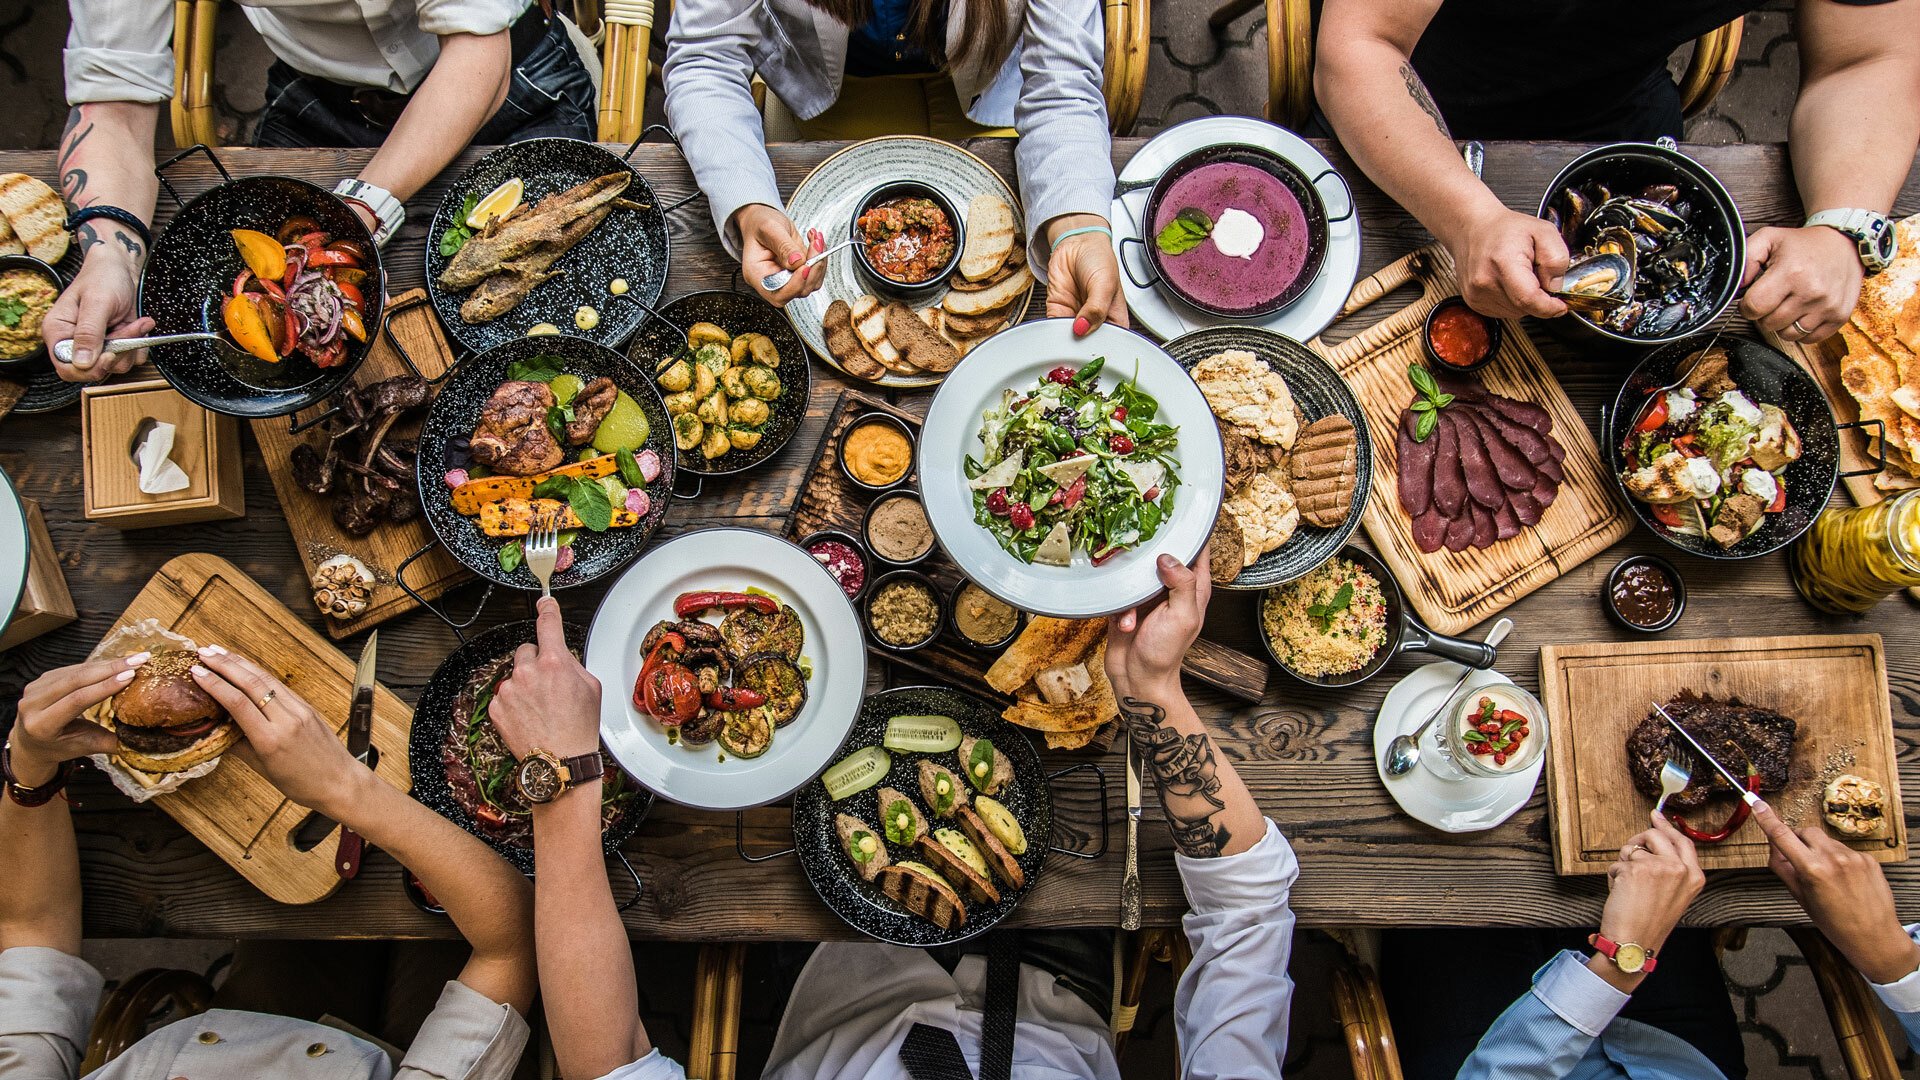 An overhead view of a table filled with plates of food.